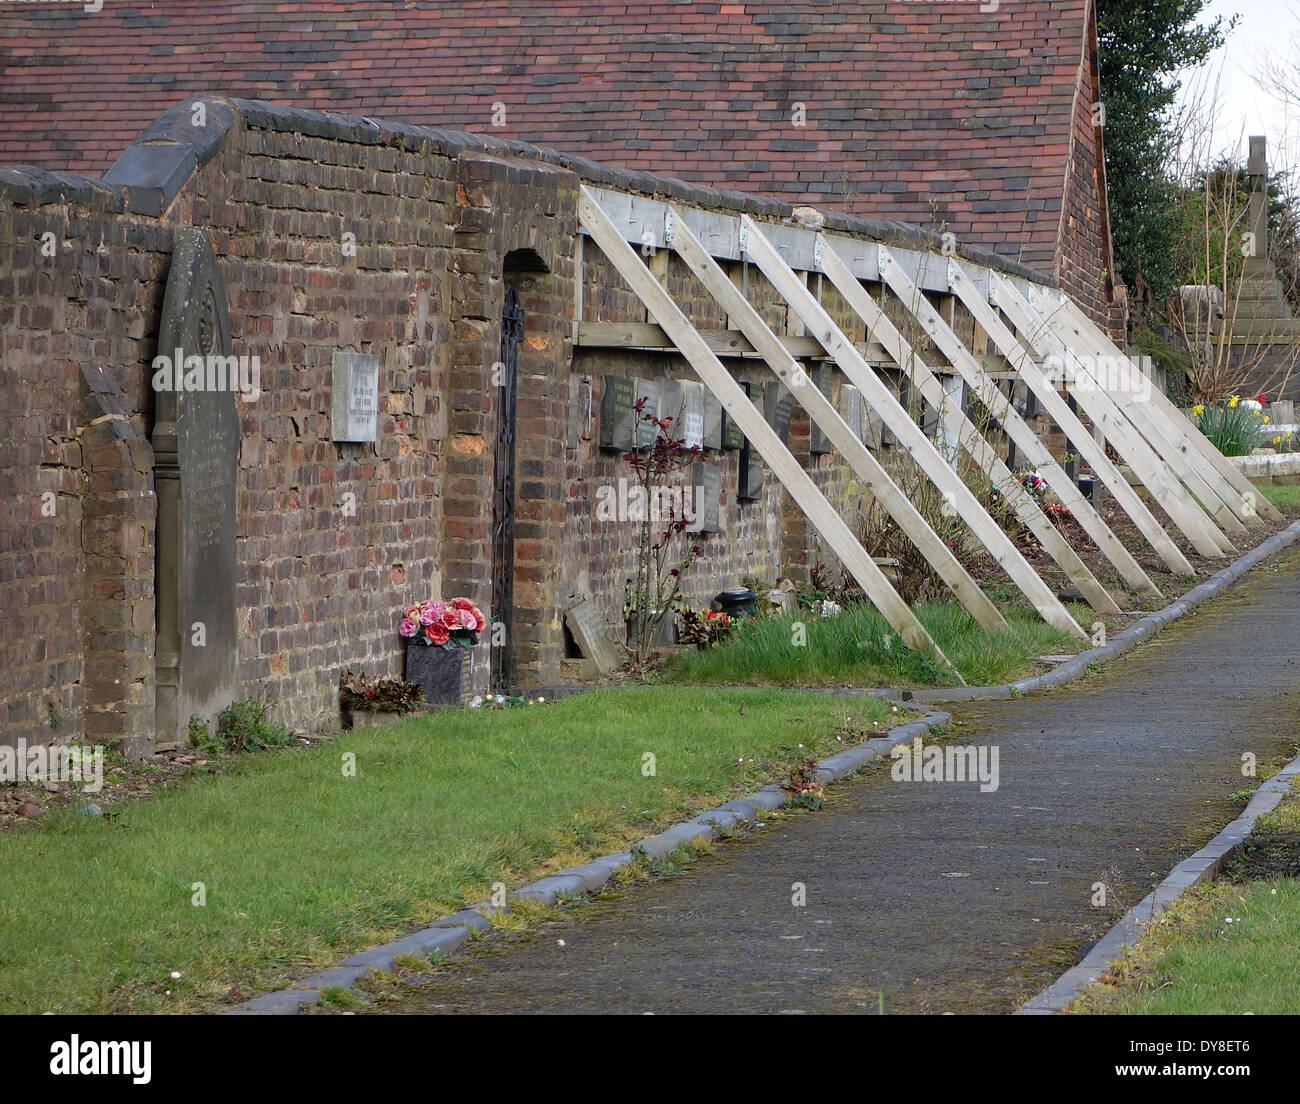 wooden-buttressing-supporting-an-unstable-wall-st-michaels-churchyard-DY8ET6.jpg